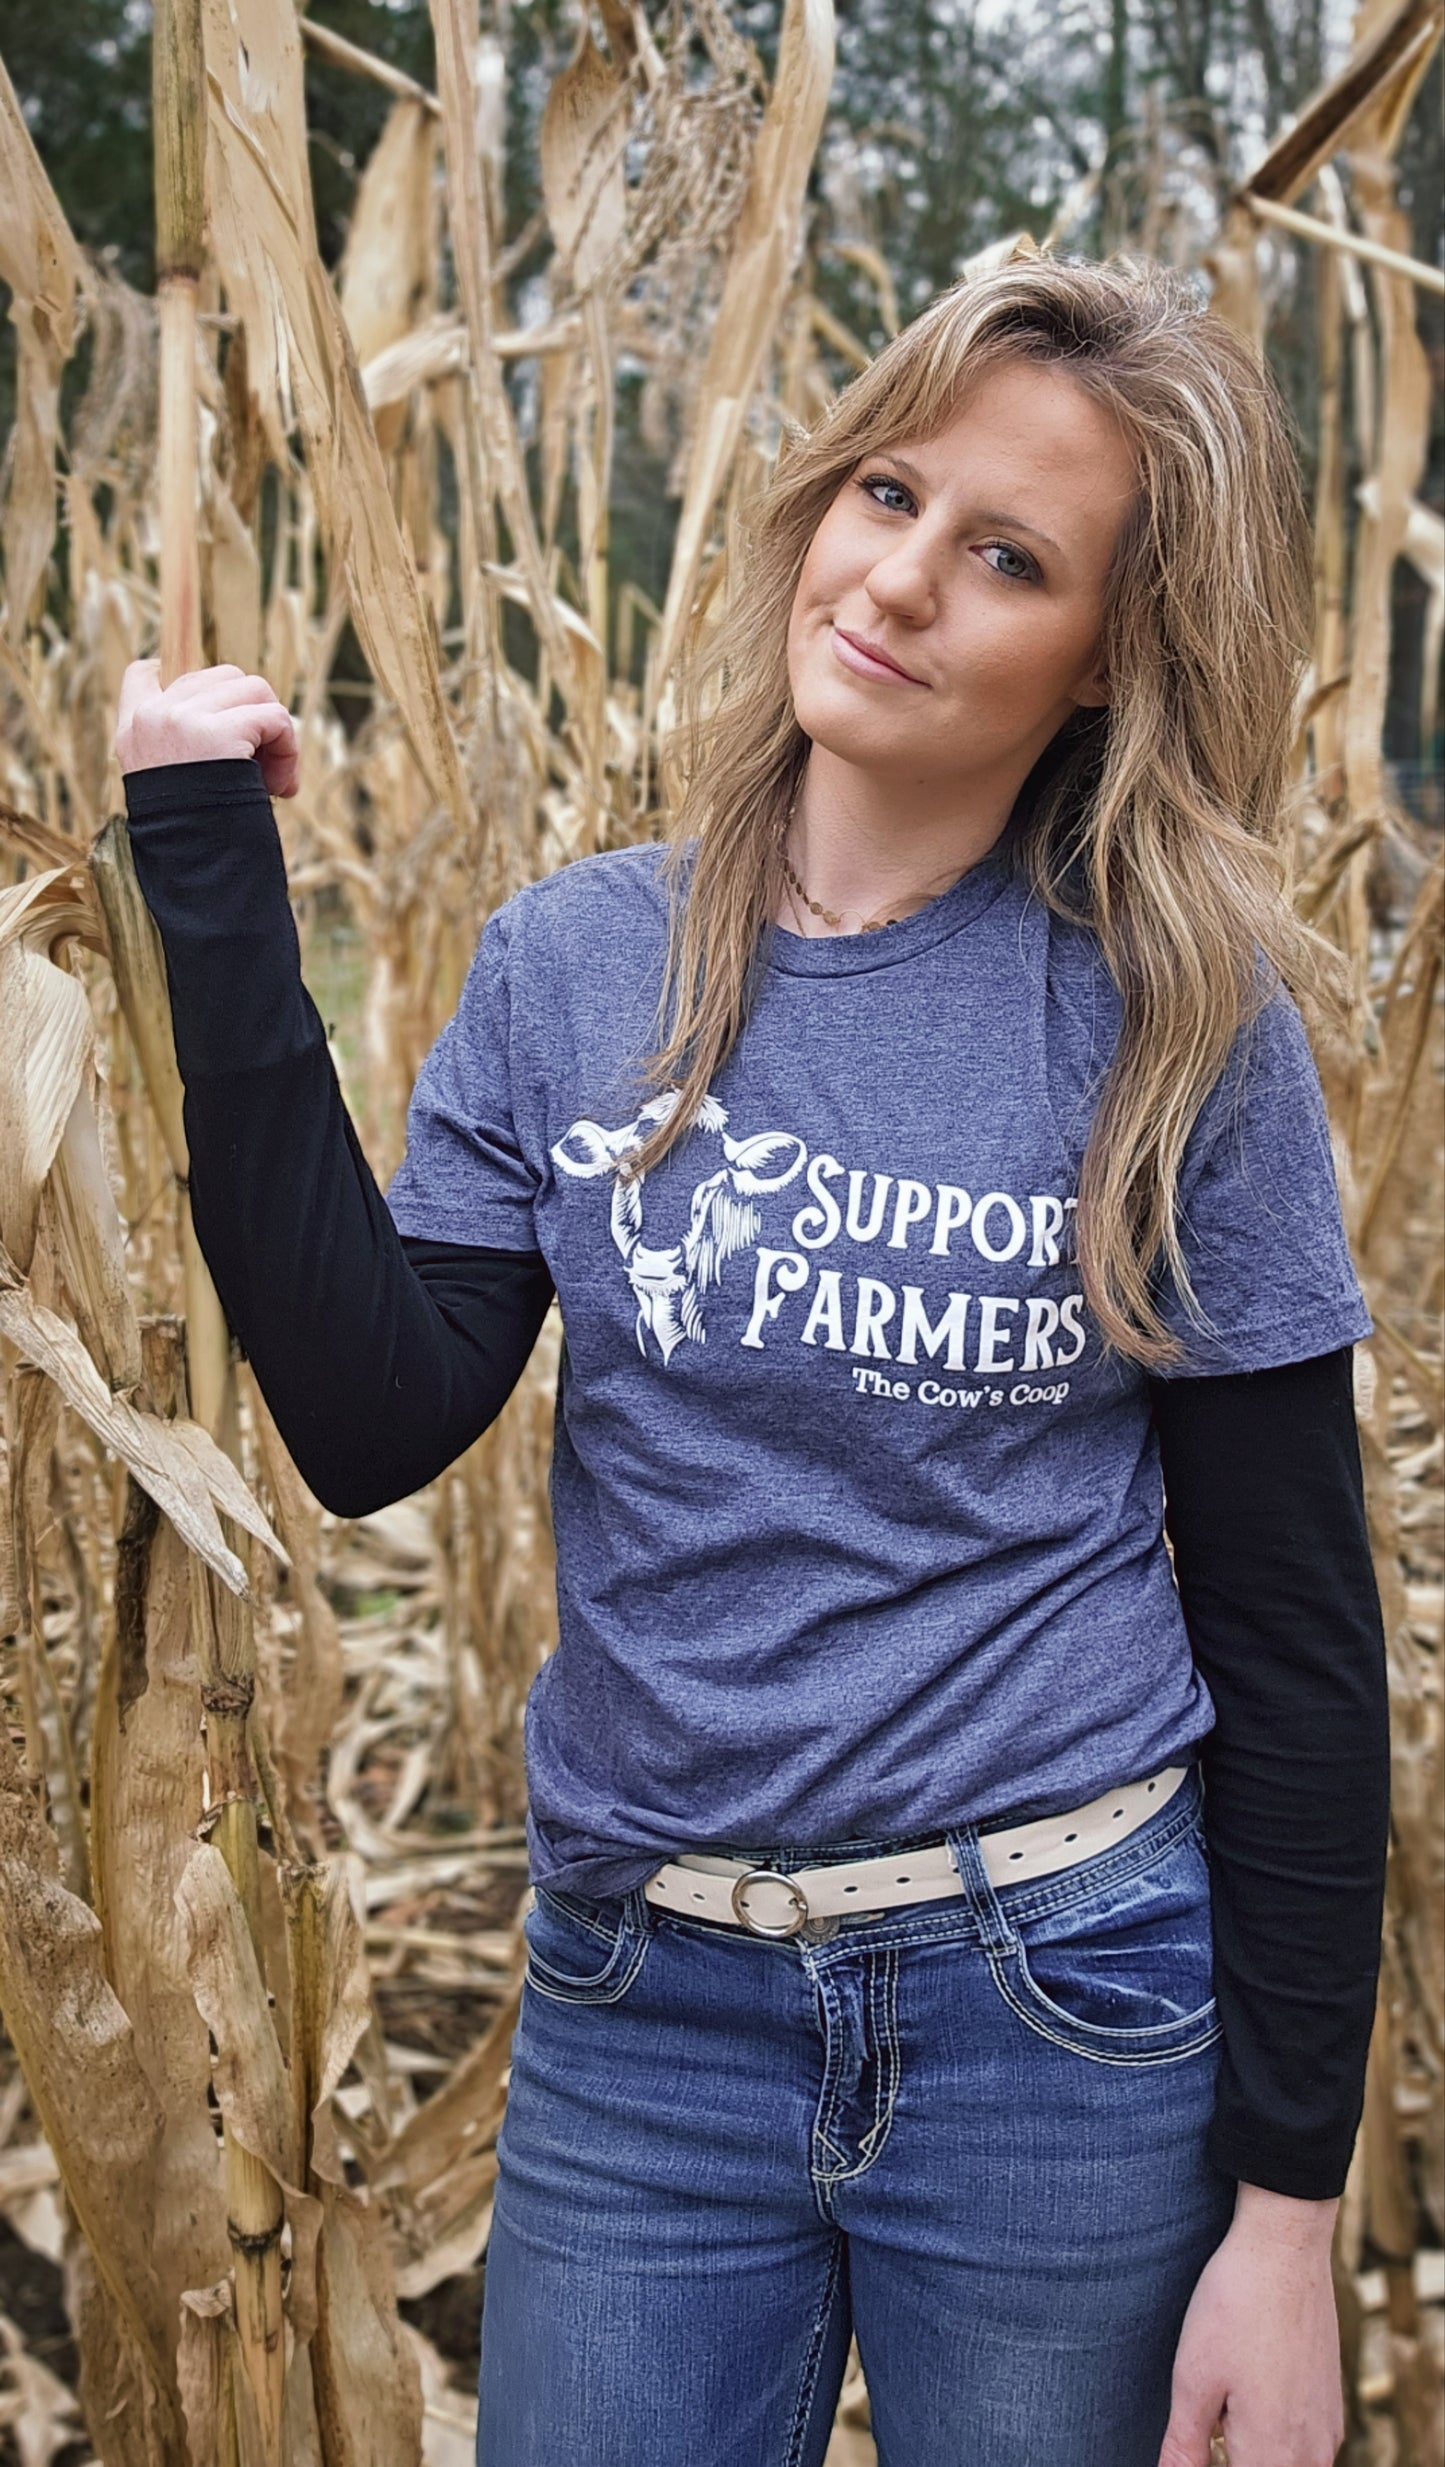 "Support Farmers" T-Shirt